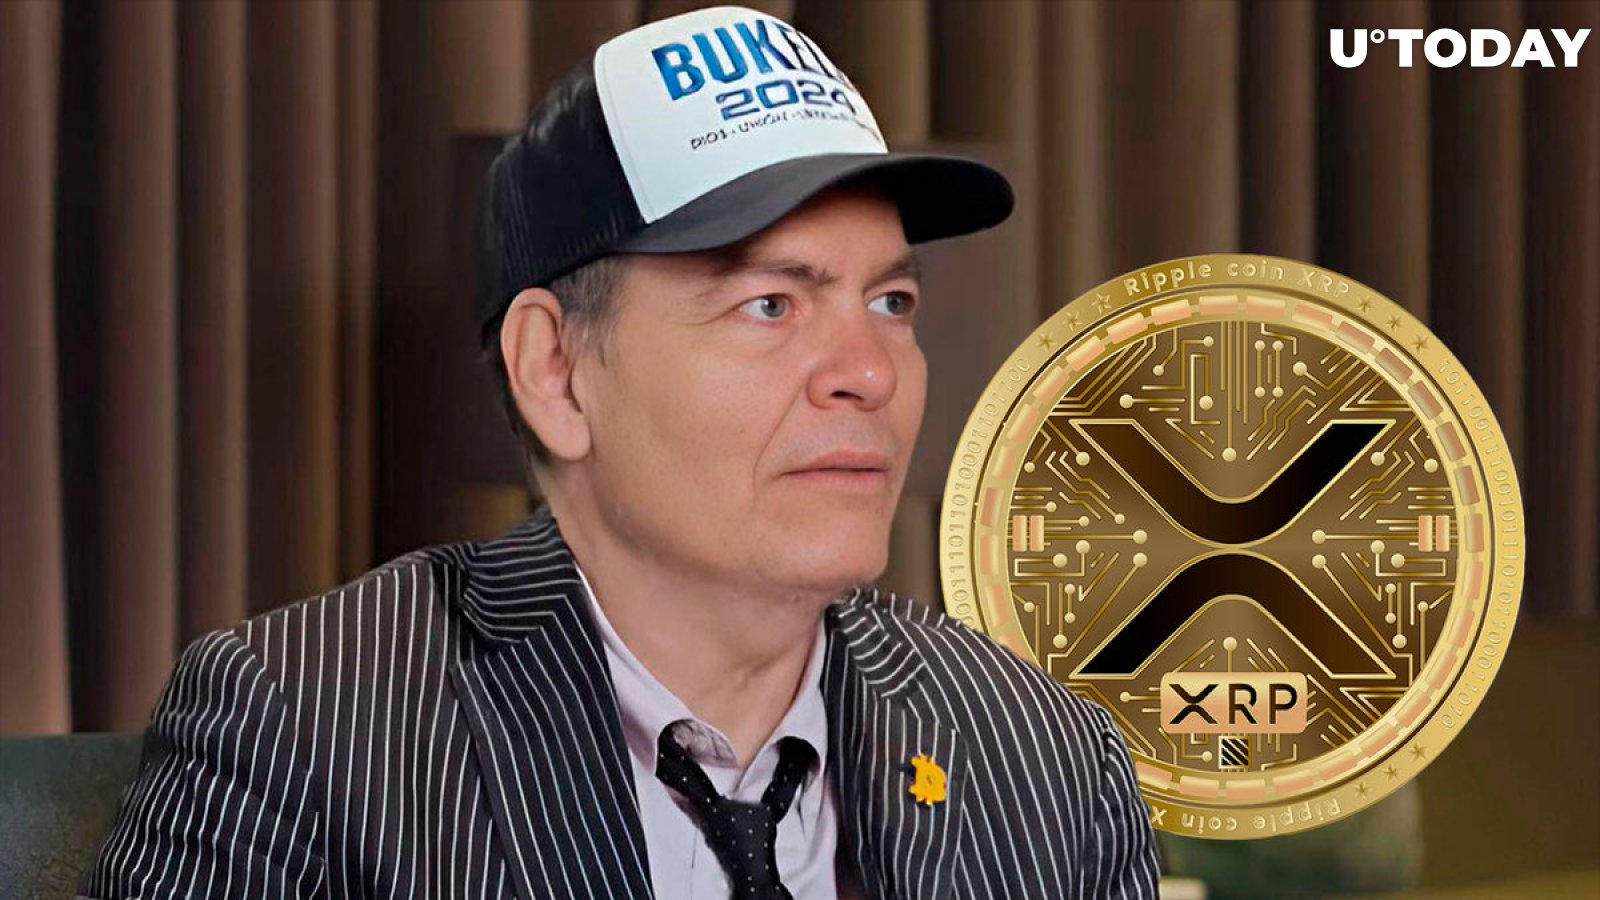 XRP Slammed by Max Keiser as 'Made to Steal Billions From Fools'